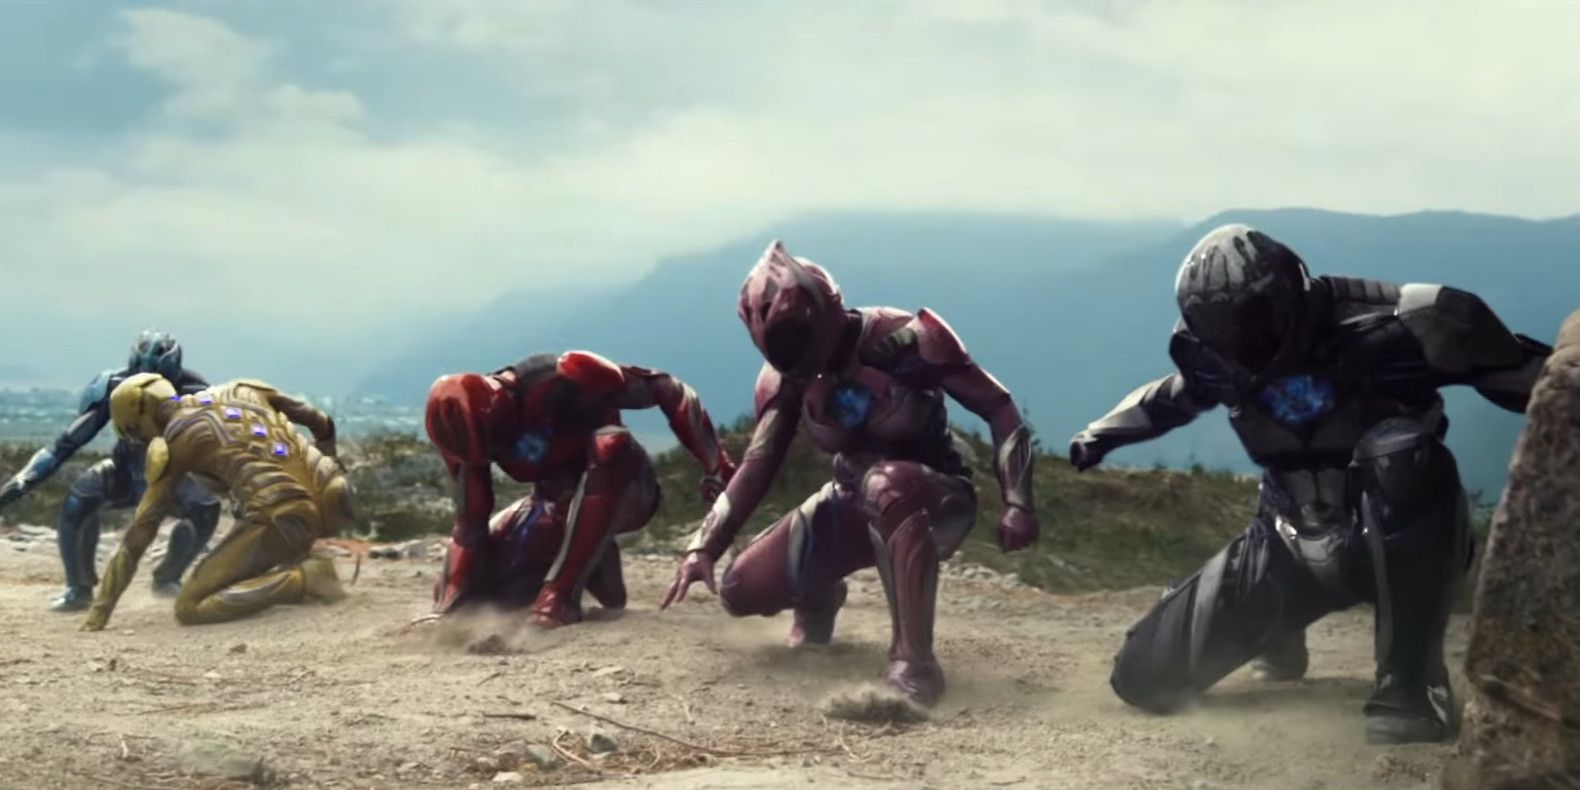 Power Rangers - The Rangers have arrived